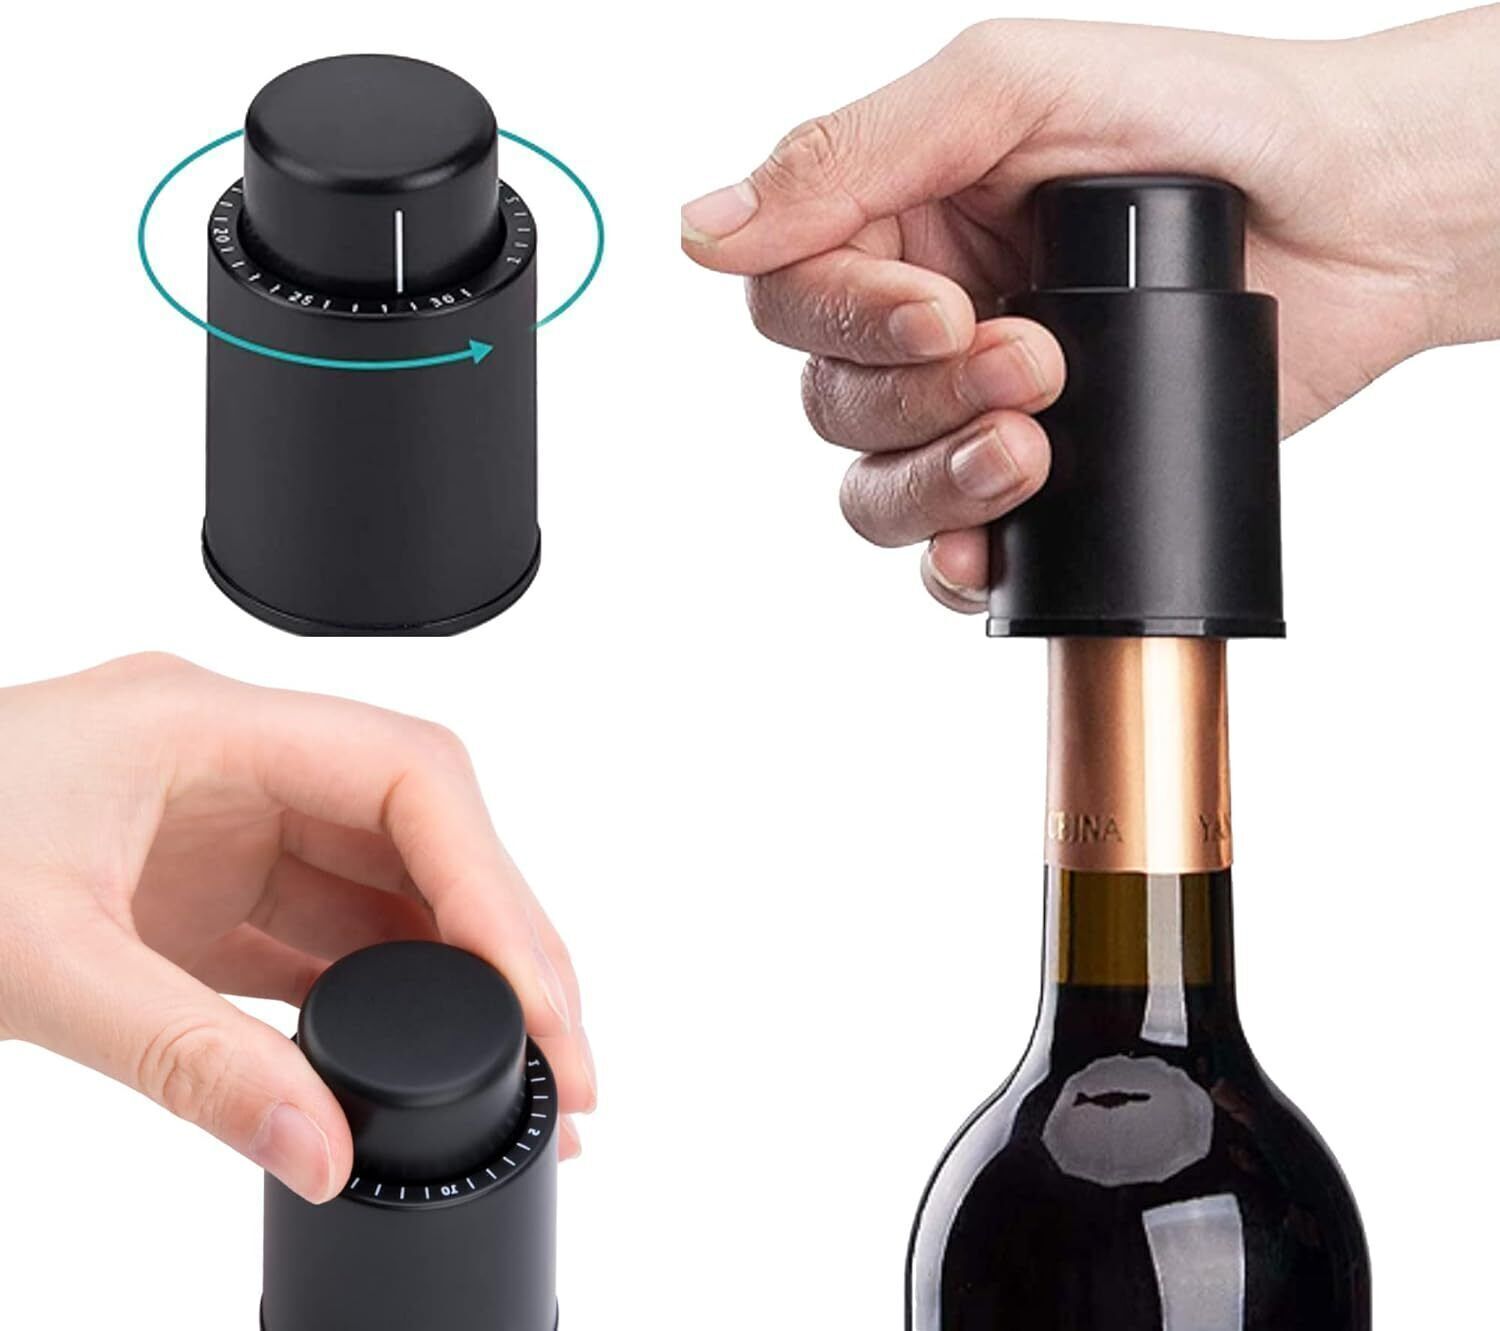 Wine Bottle Stopper With Time Recorder Keeps Your Wine Really Fresh 2 Pk - RLO Tech